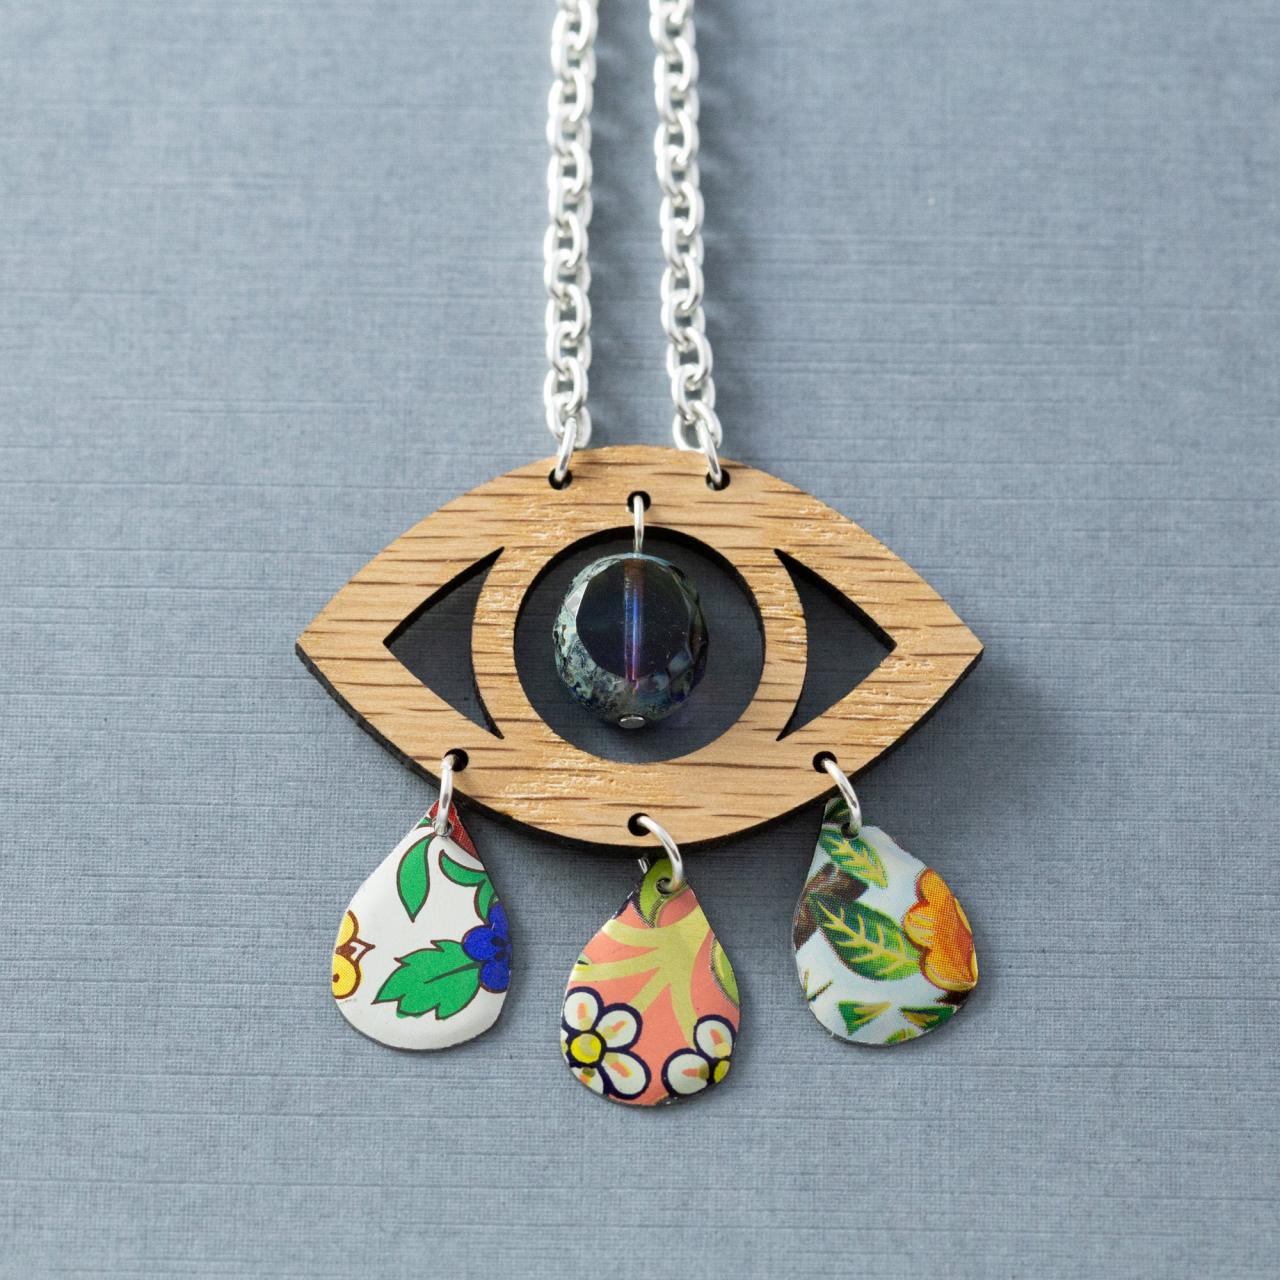 Wood Evil Eye Pendant Necklace, Witchy Necklace Silver, Silver Chain Necklace, Teardrop Necklace, Bohemian Necklace For Women, Boho Jewelry